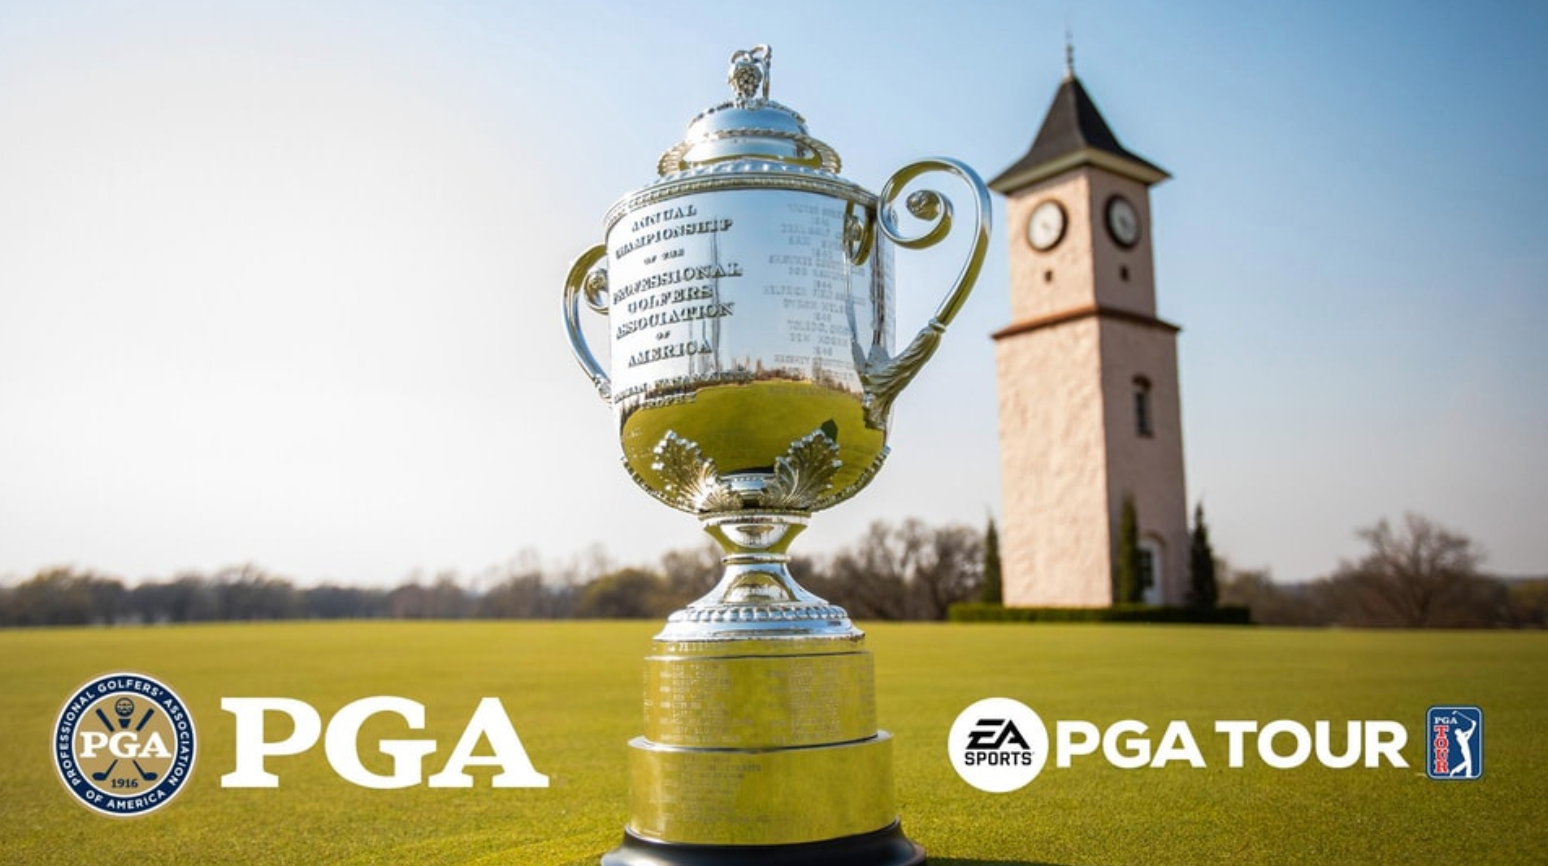 EA Sports PGA Tour: Everything you need to know about the latest golf game